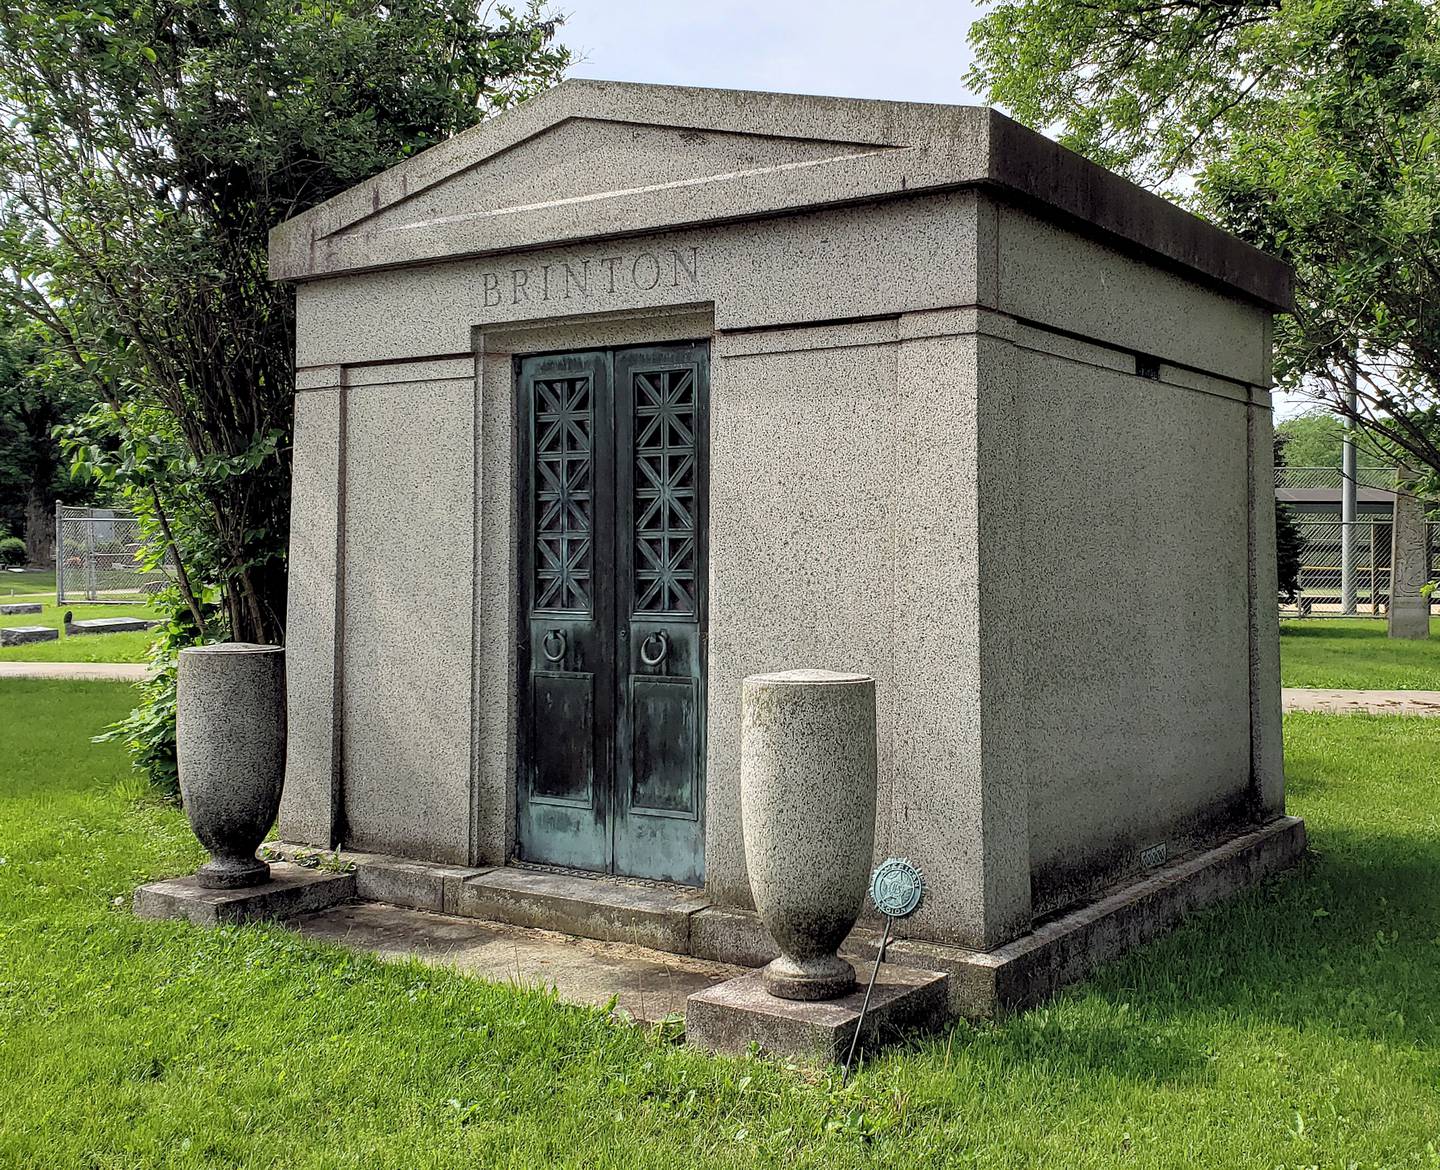 The Brinton family mausoleum, the only private mausoleum at Oakwood Cemetery.